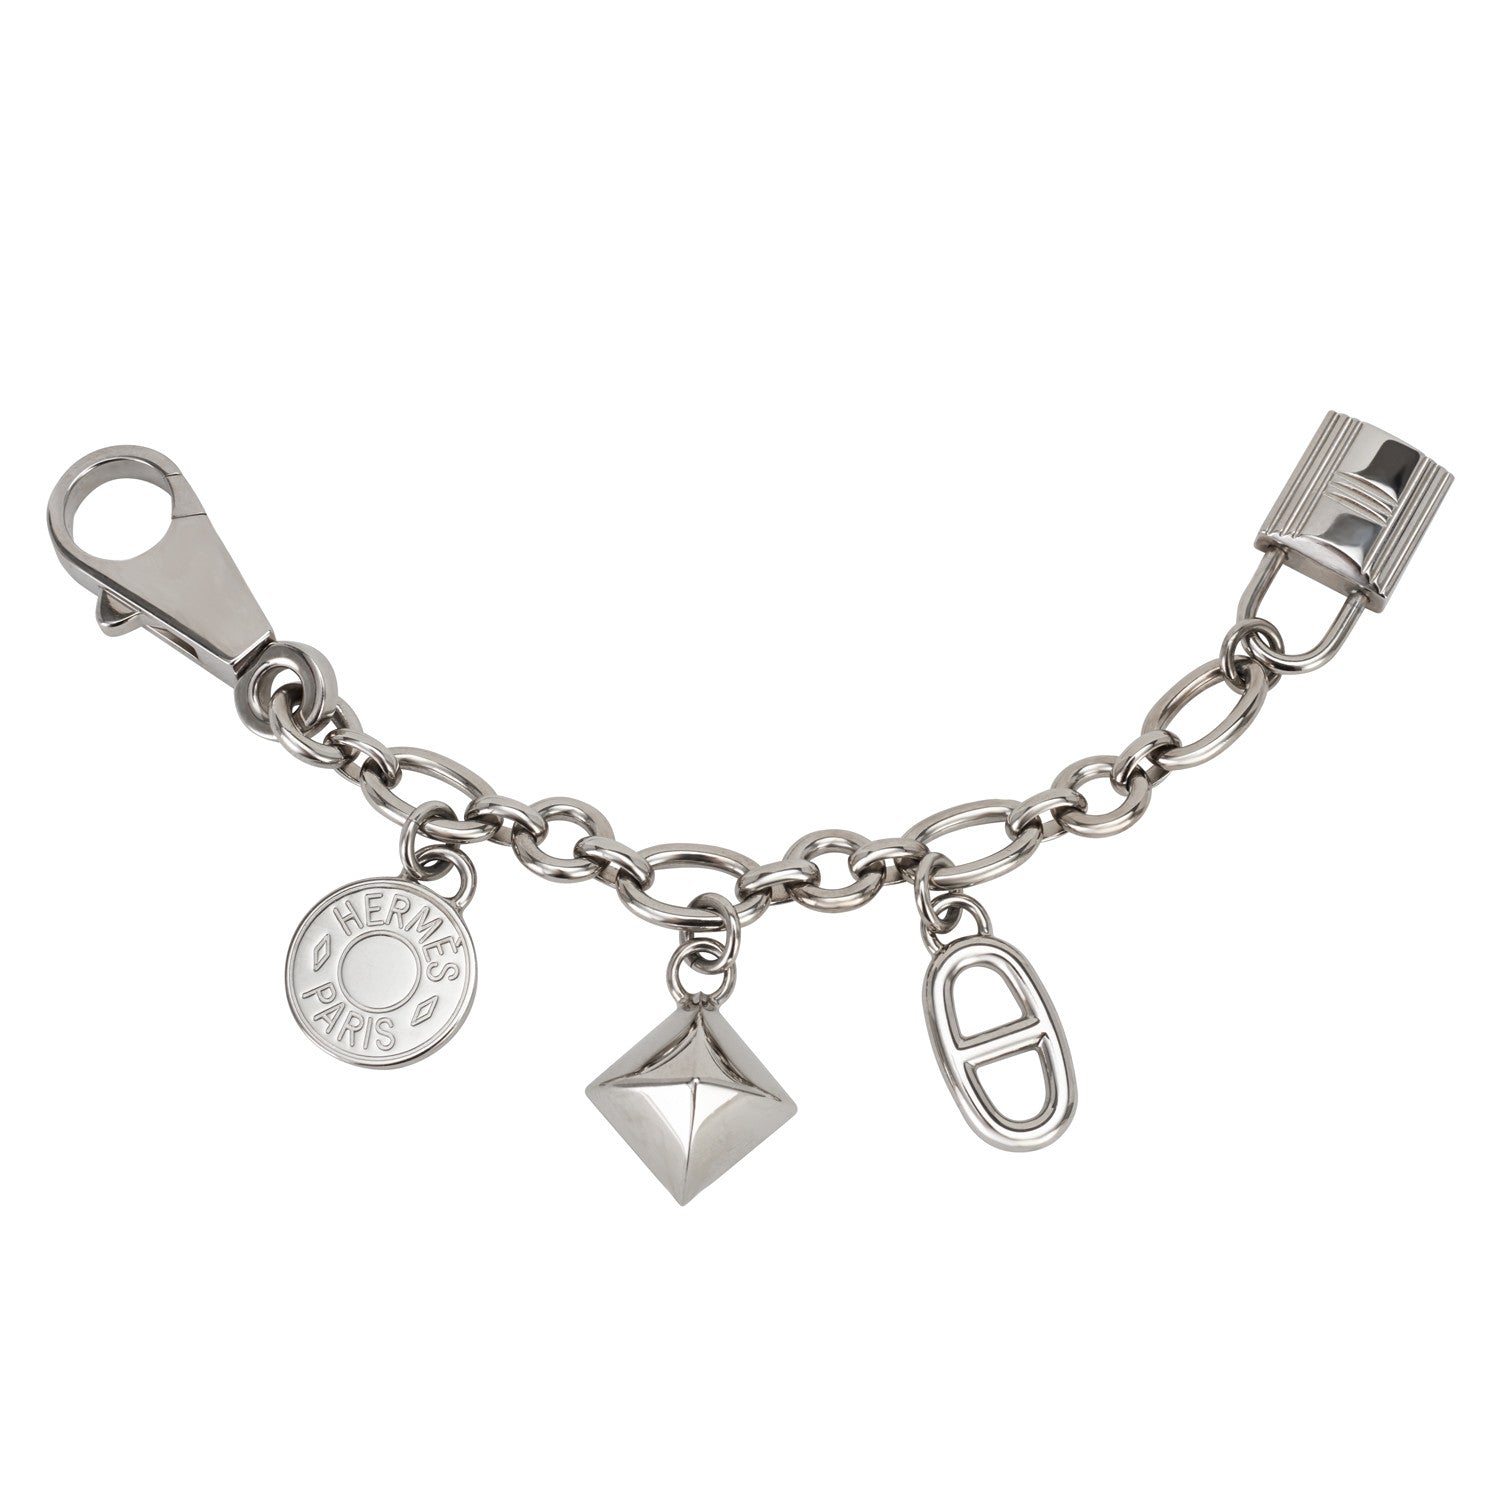 Kelly twilly charm bag charm Hermès Silver in Other - 34404199